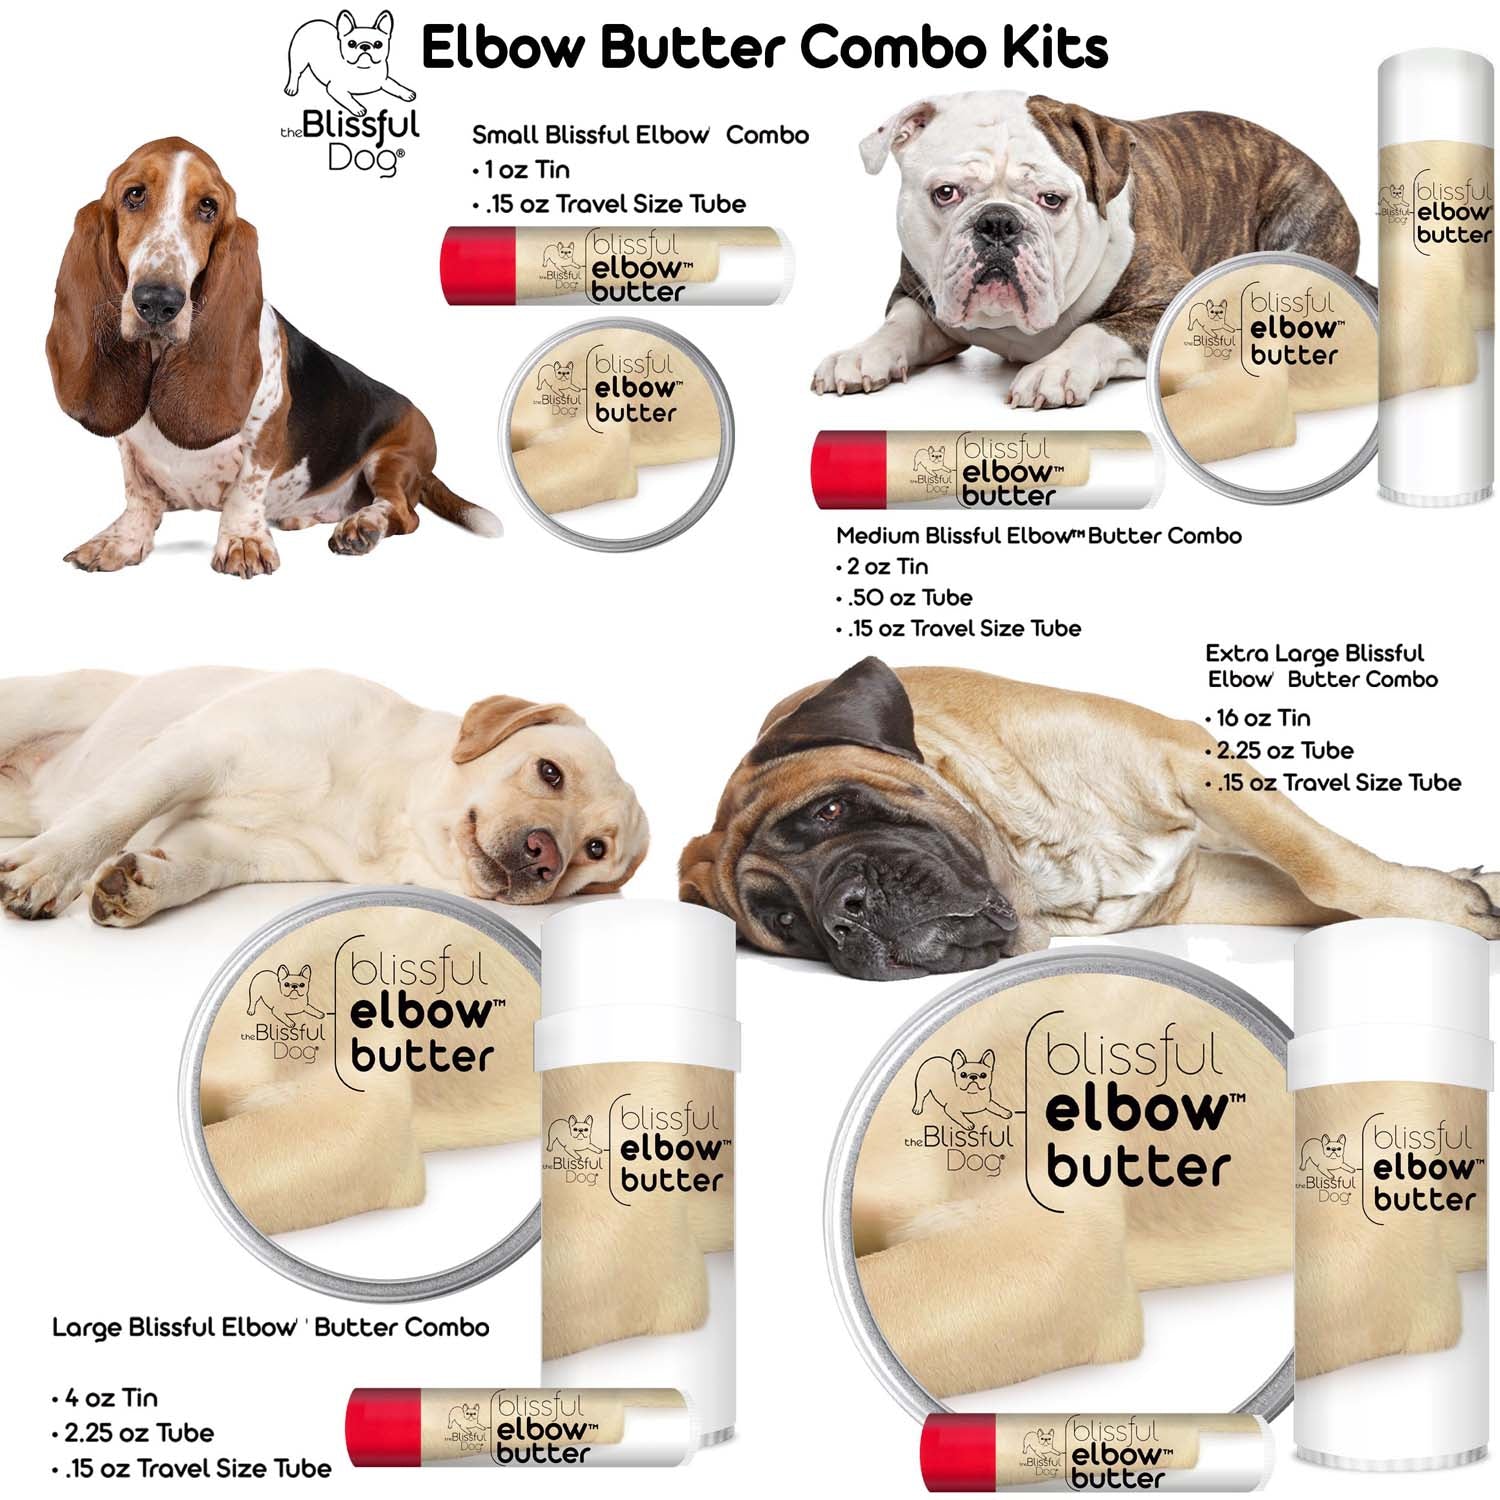 elbow butter moisturizer for dogs